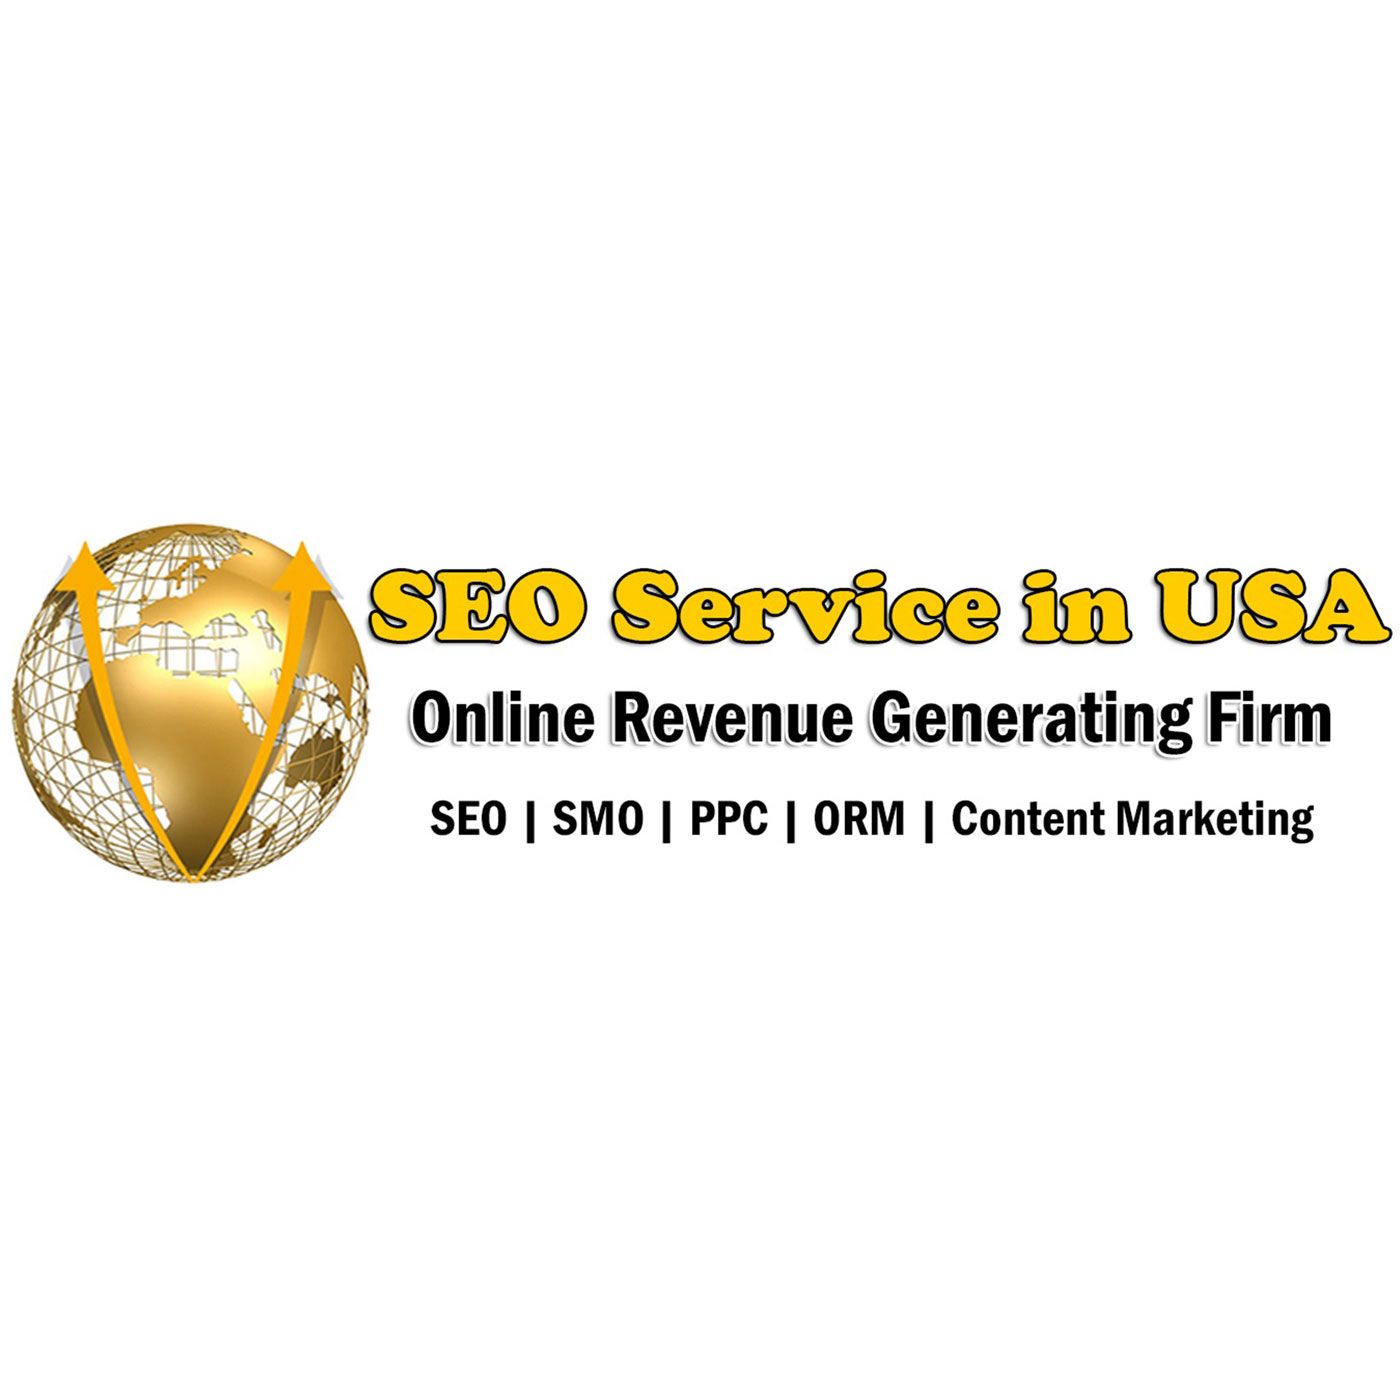 Seo Services in USA